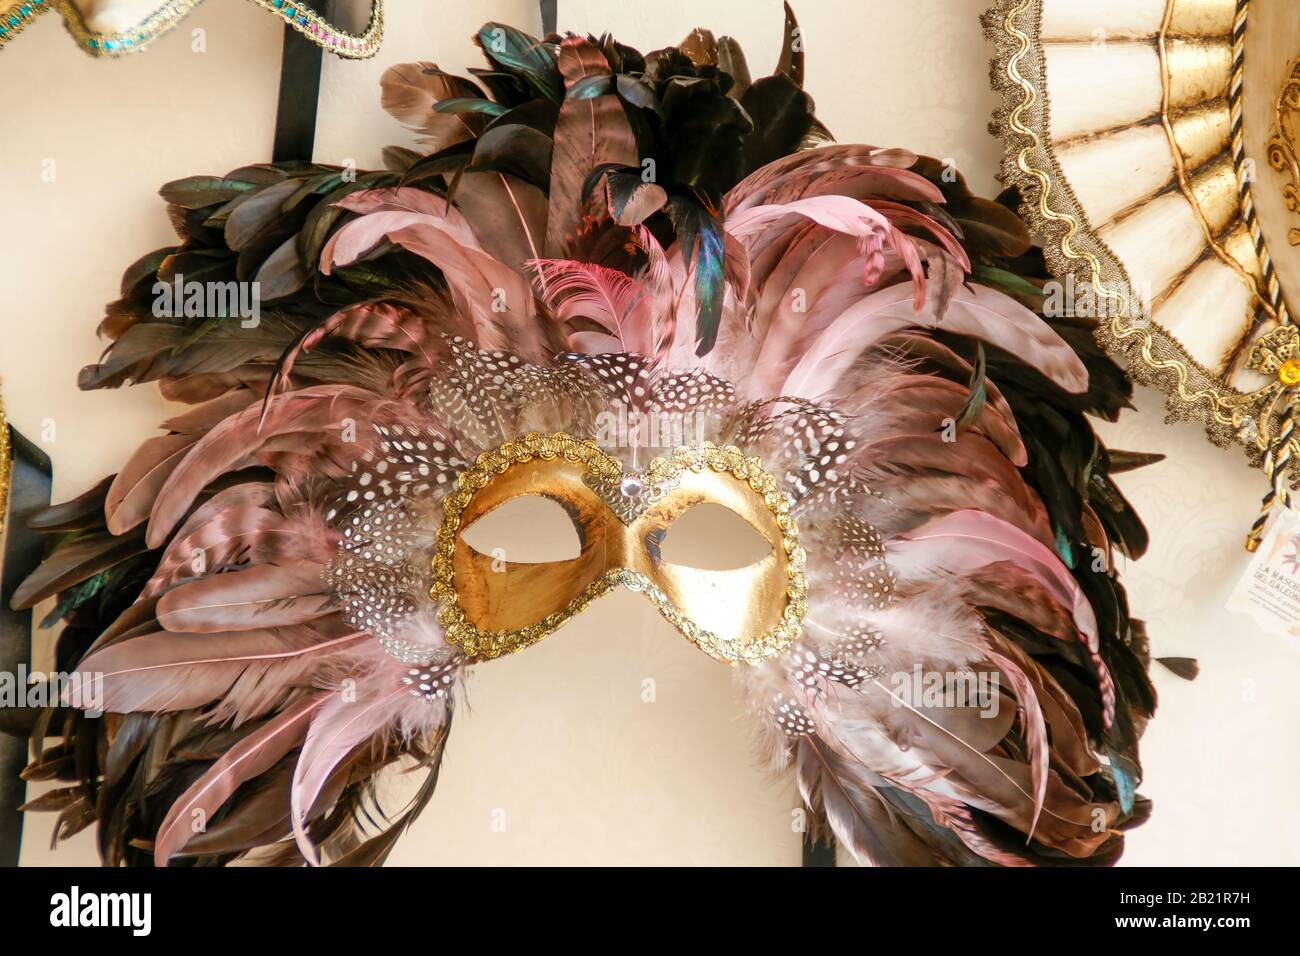 Carnival masks for sale in a shop. Venice, Italy Stock Photo